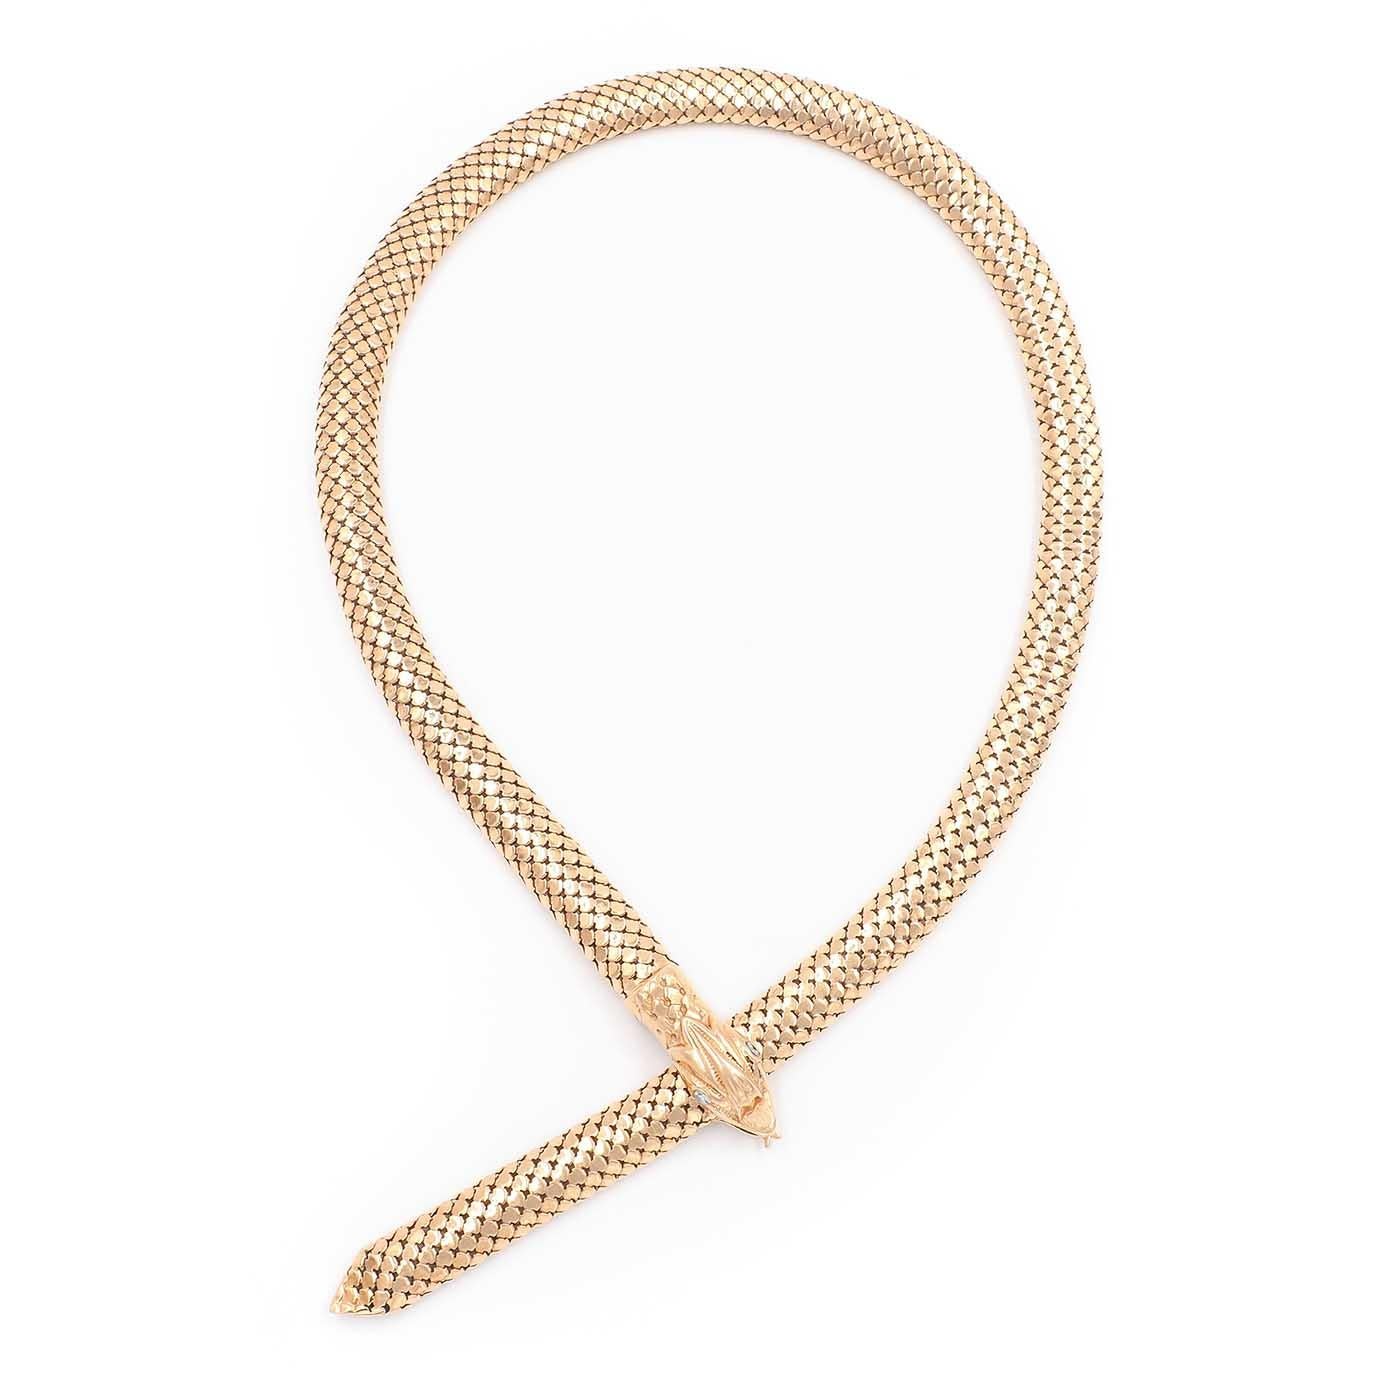 Vintage Italian 18k Yellow Gold Mesh Snake Necklace. Depicting a three dimensional snake, with a mouth that acts as a clasp so that the necklace can be worn at different lengths (see photo). With 2 diamonds set into the eyes that weigh approximately